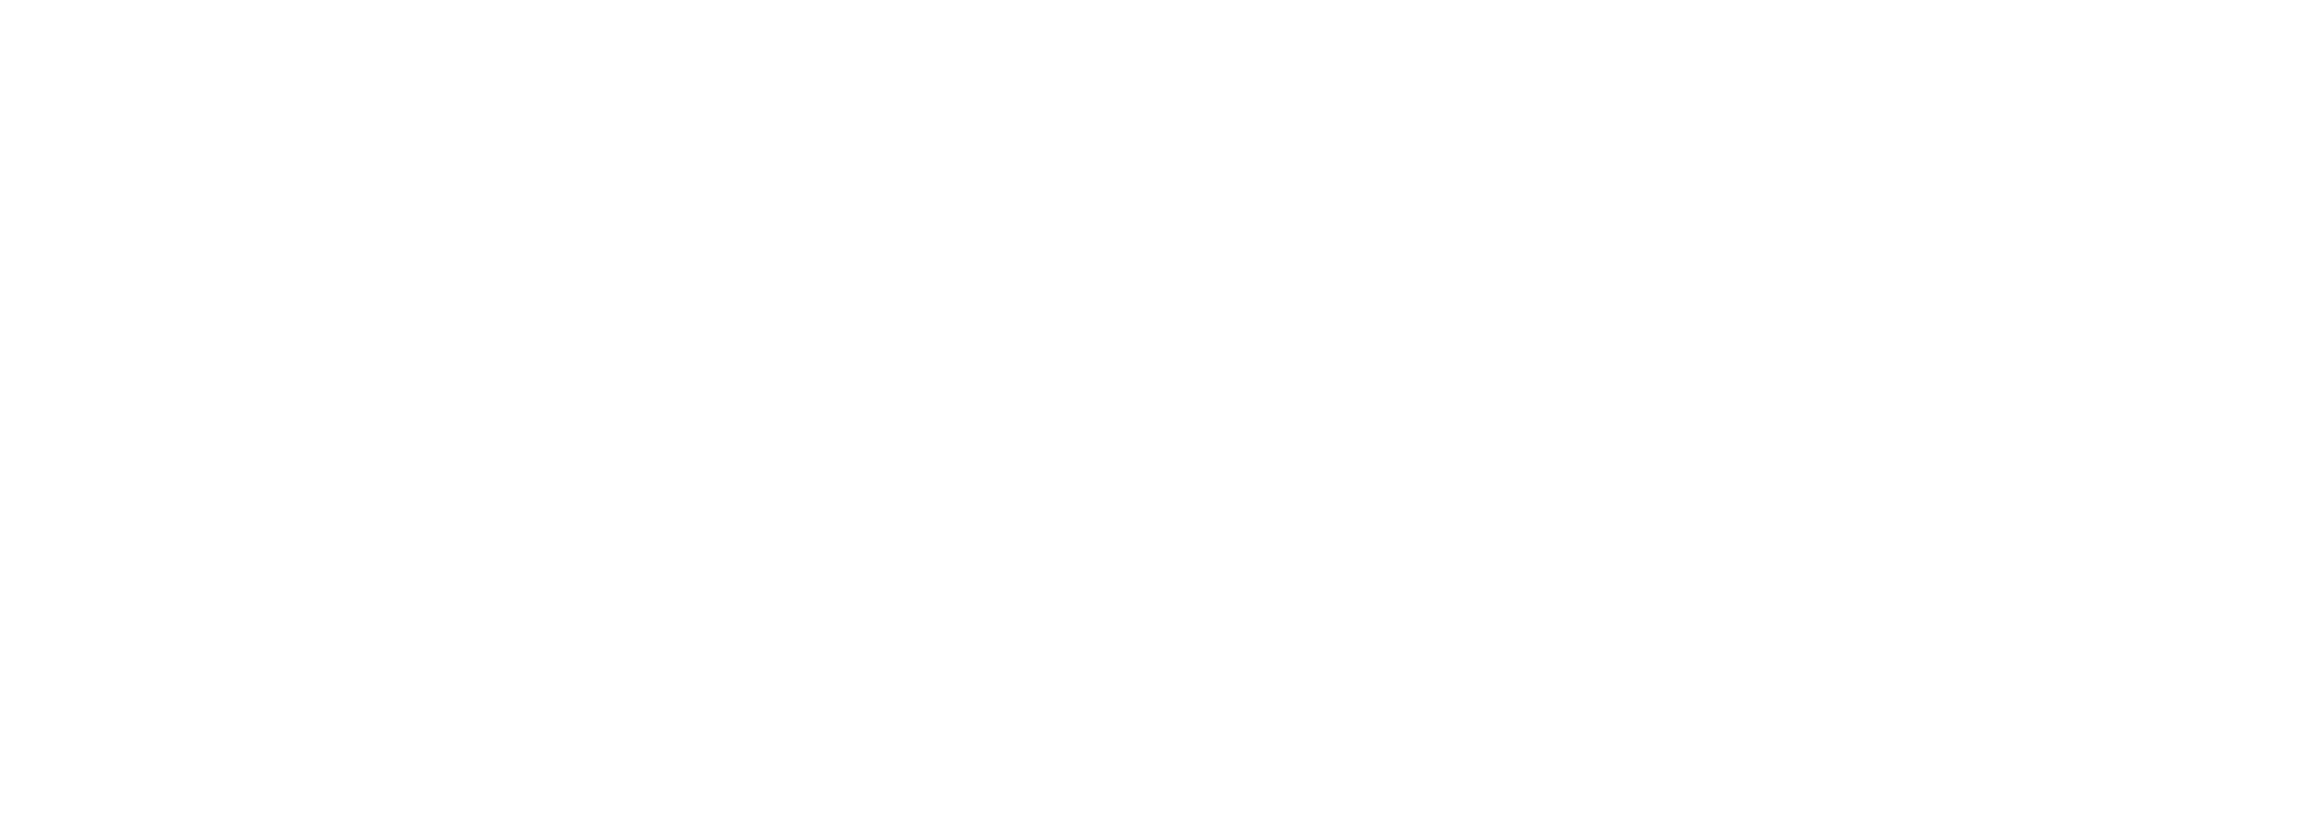 Lonsdale Links logo in white